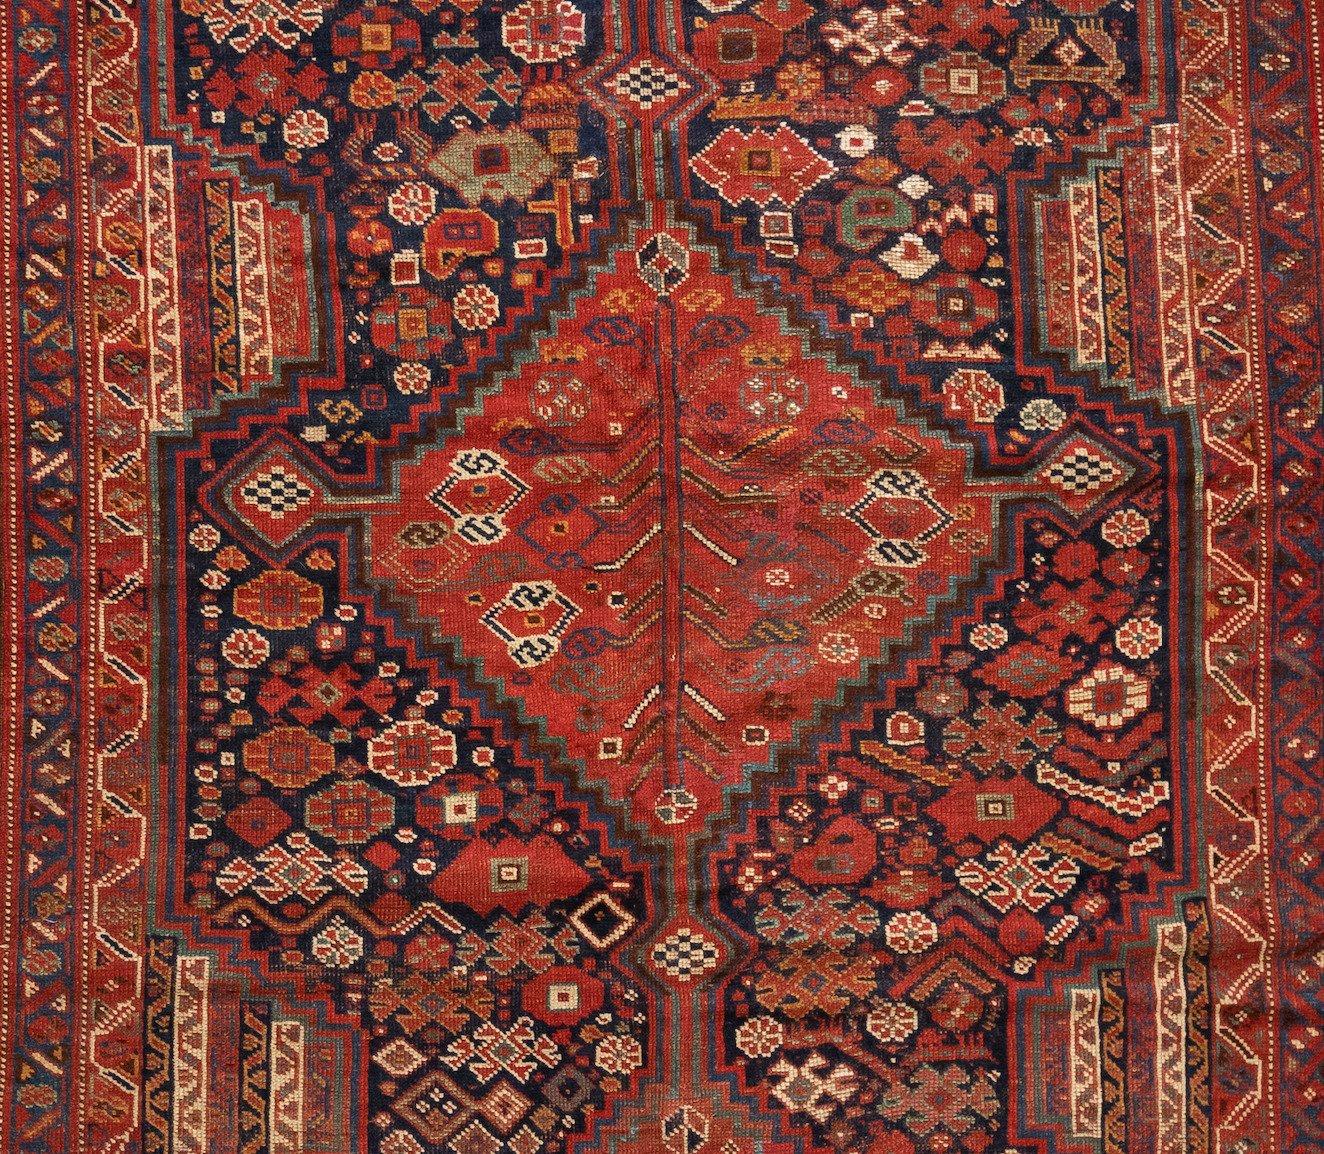 Hand-Knotted Antique Red Persian Khamseh Geometric Rug, circa 1920s-1930s For Sale